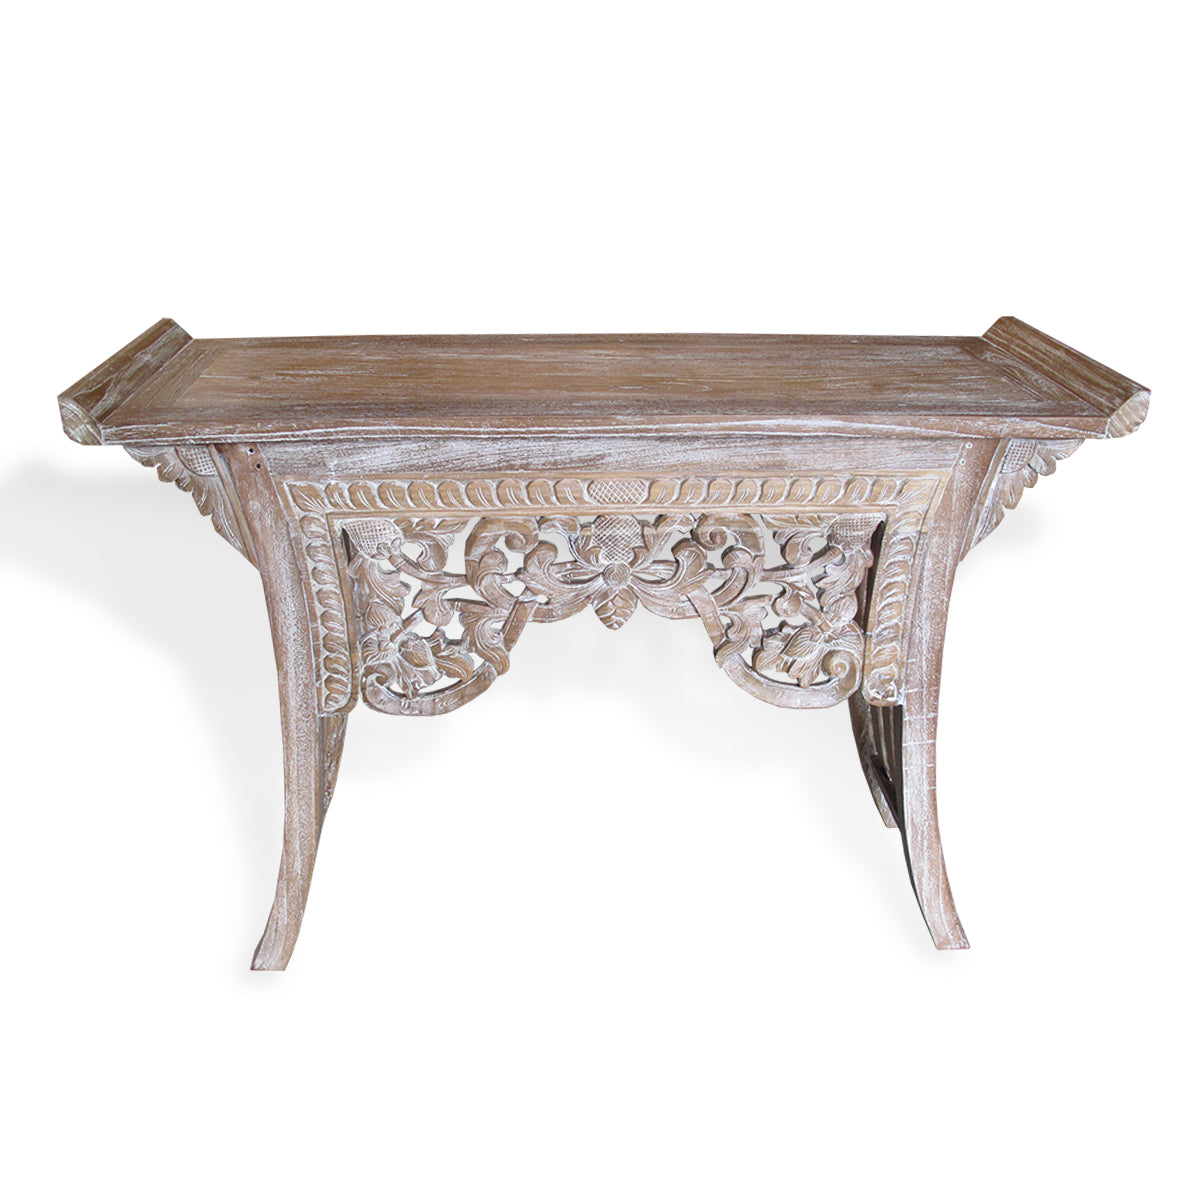 LAC045 WHITE WASH RECYCLED TEAK WOOD CARVED CONSOLE TABLE